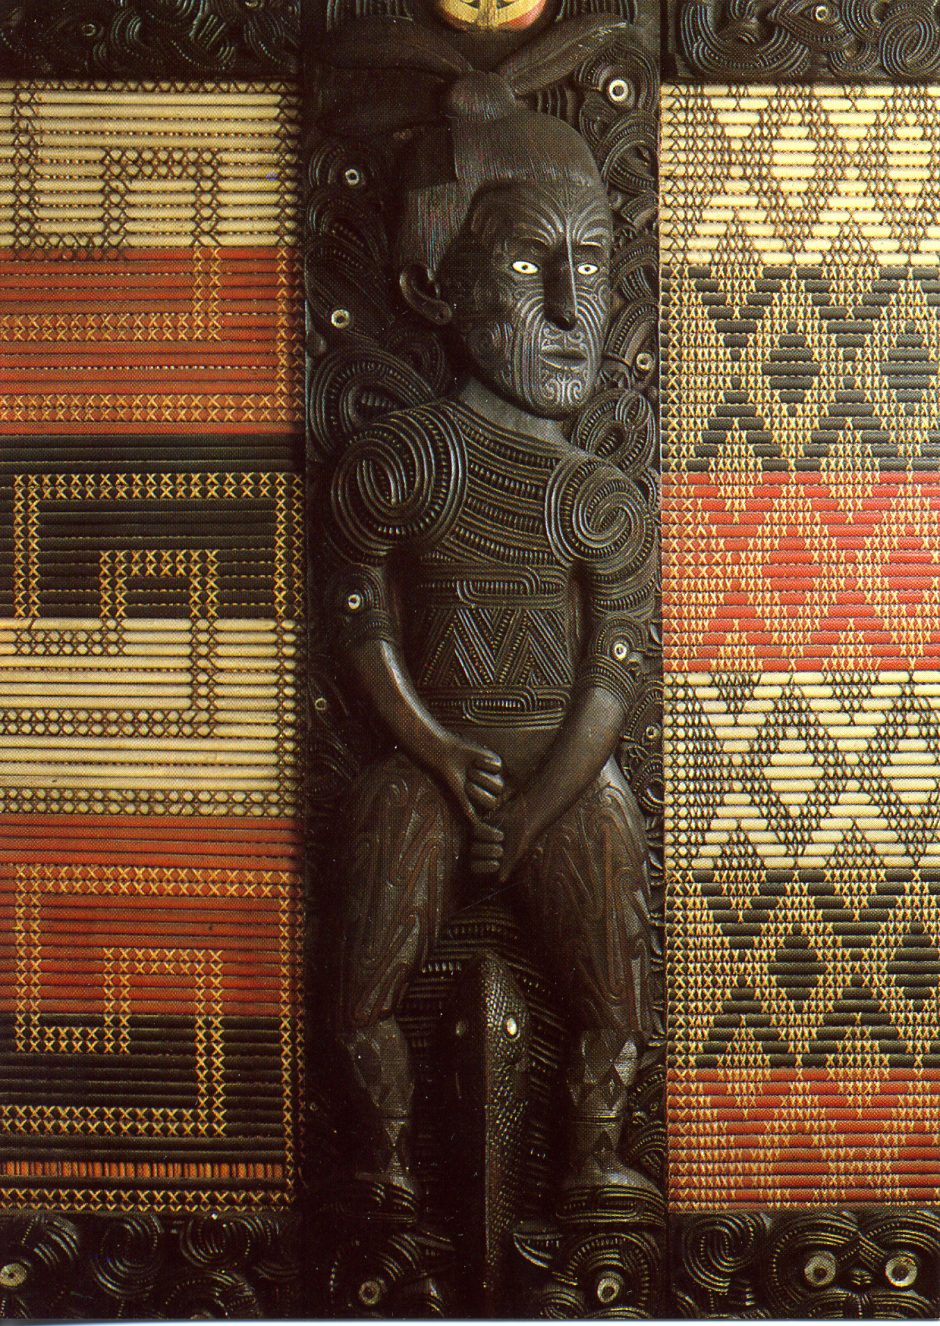 Maui pulls Te-Ilka-a-Maui to the surface, carving (detail view)